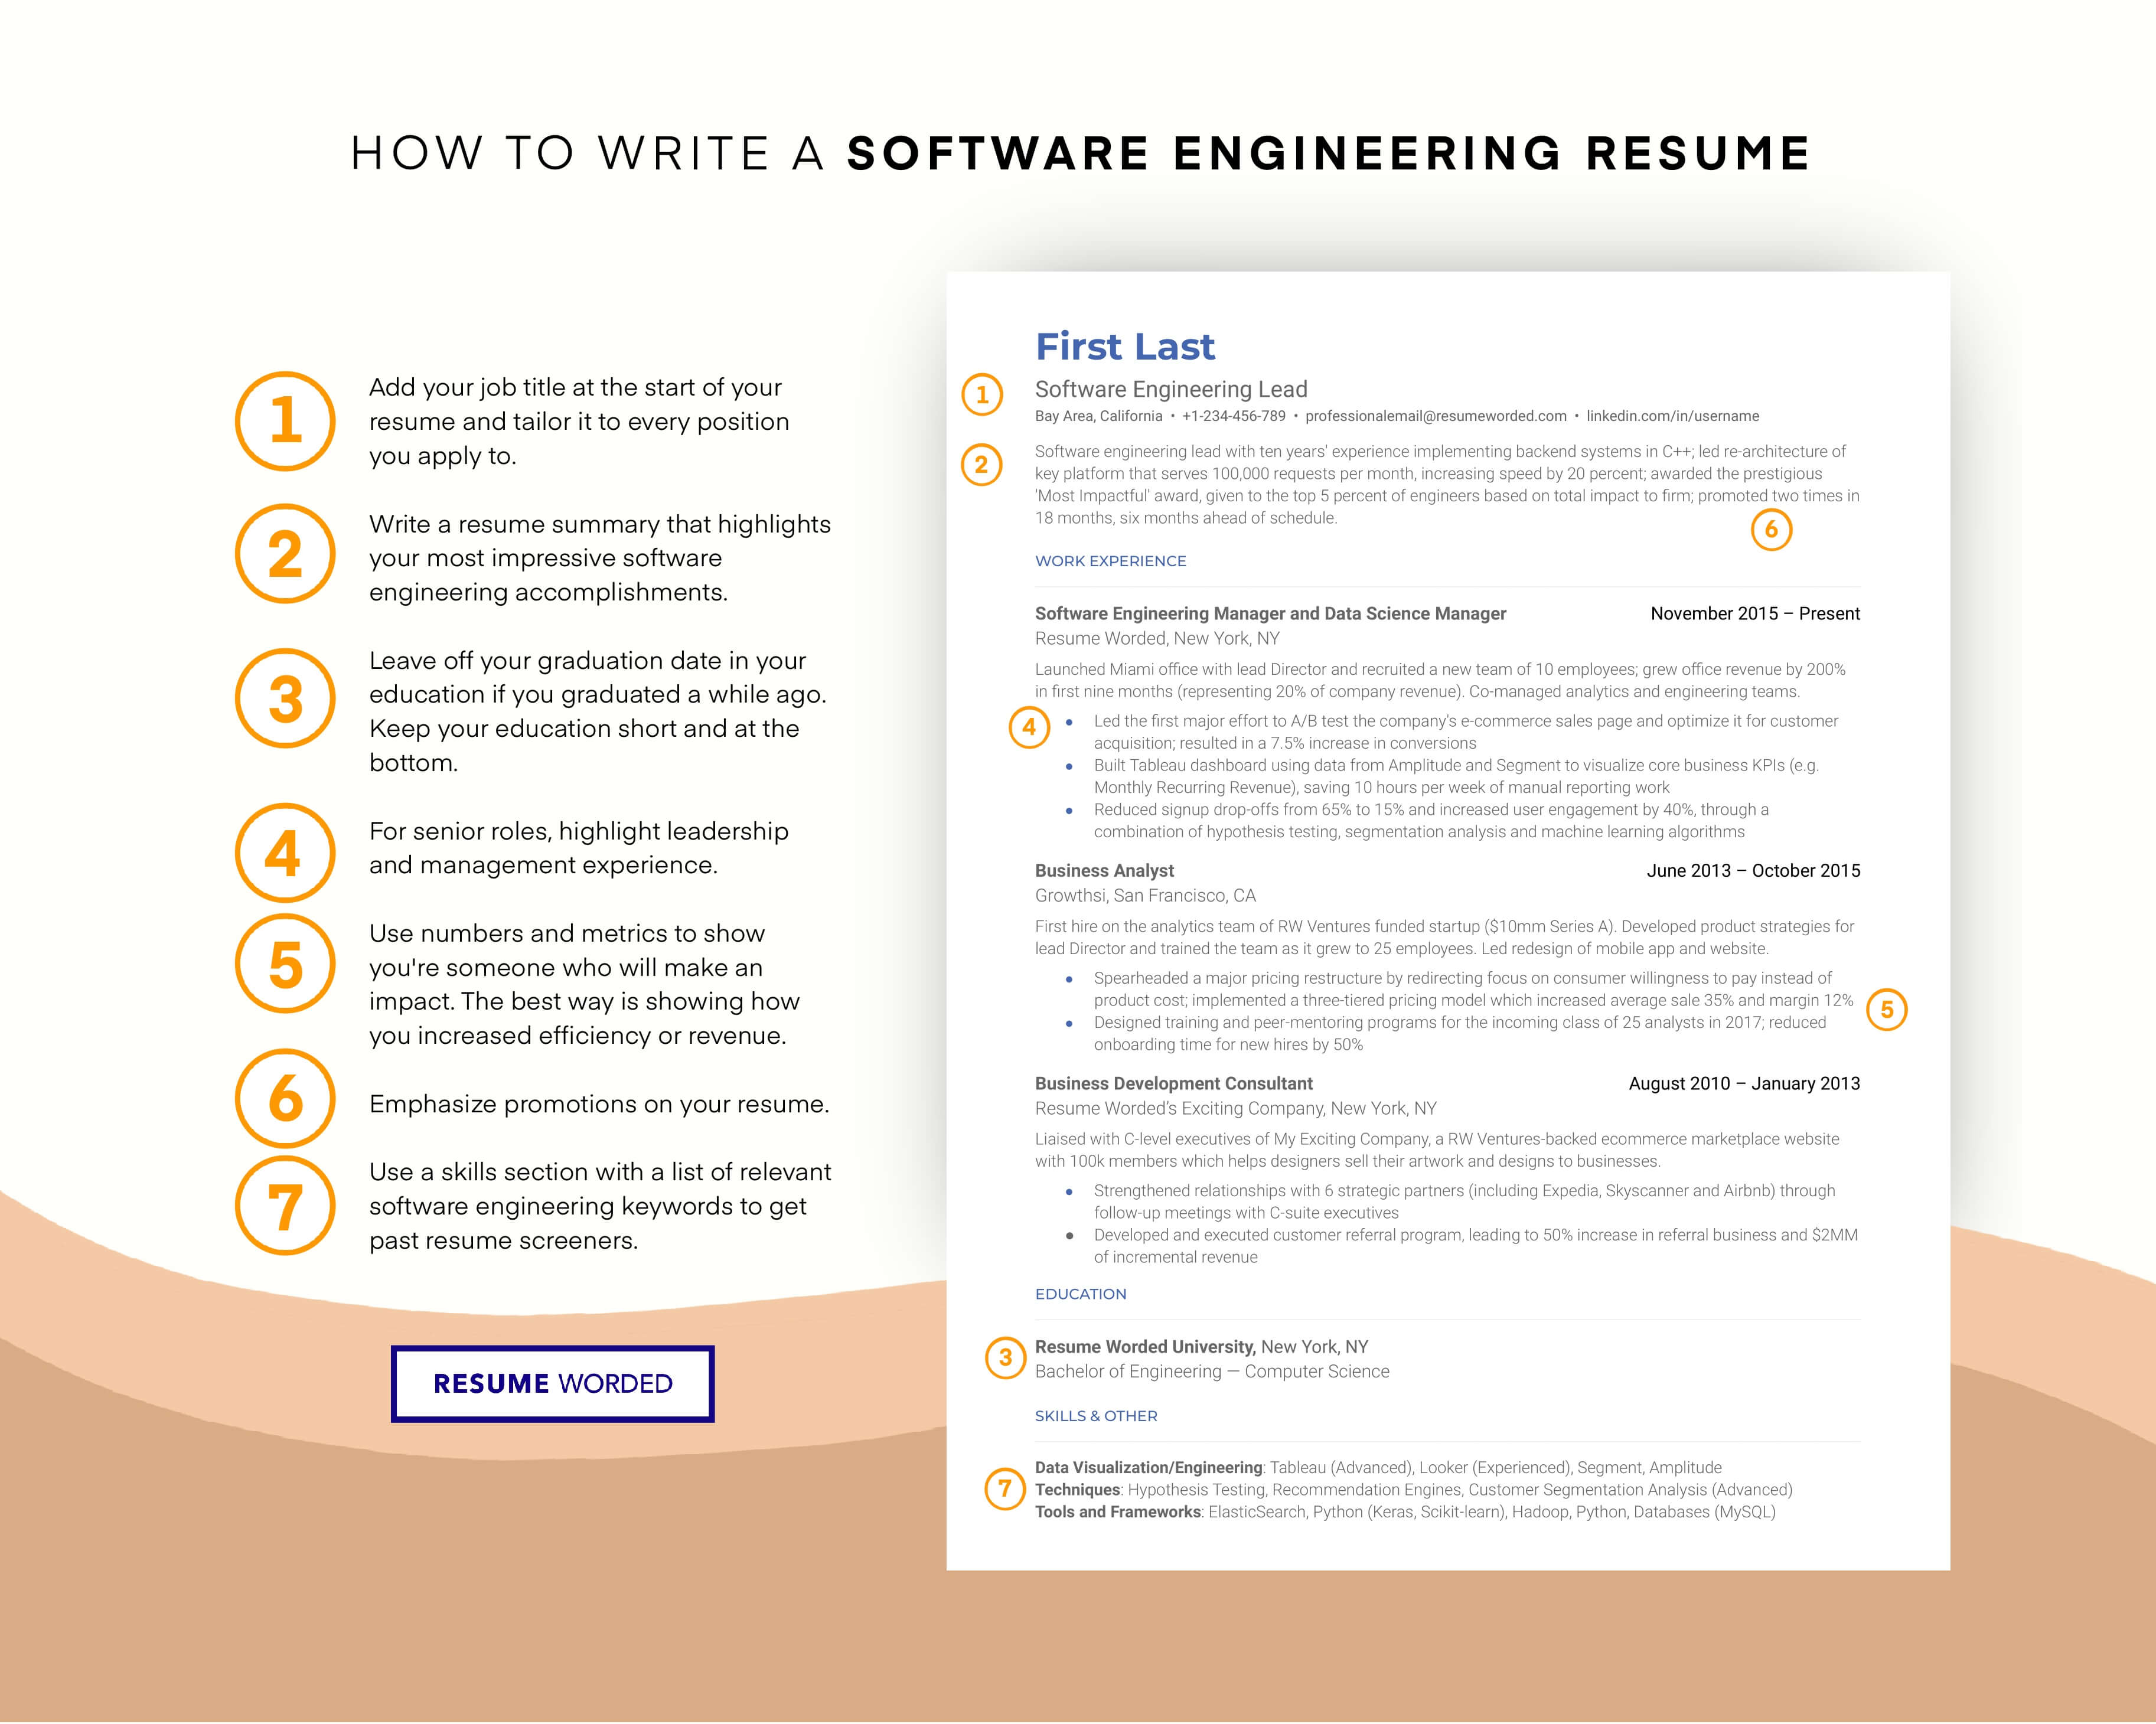 Showcase your software skills - Bookkeeper CV